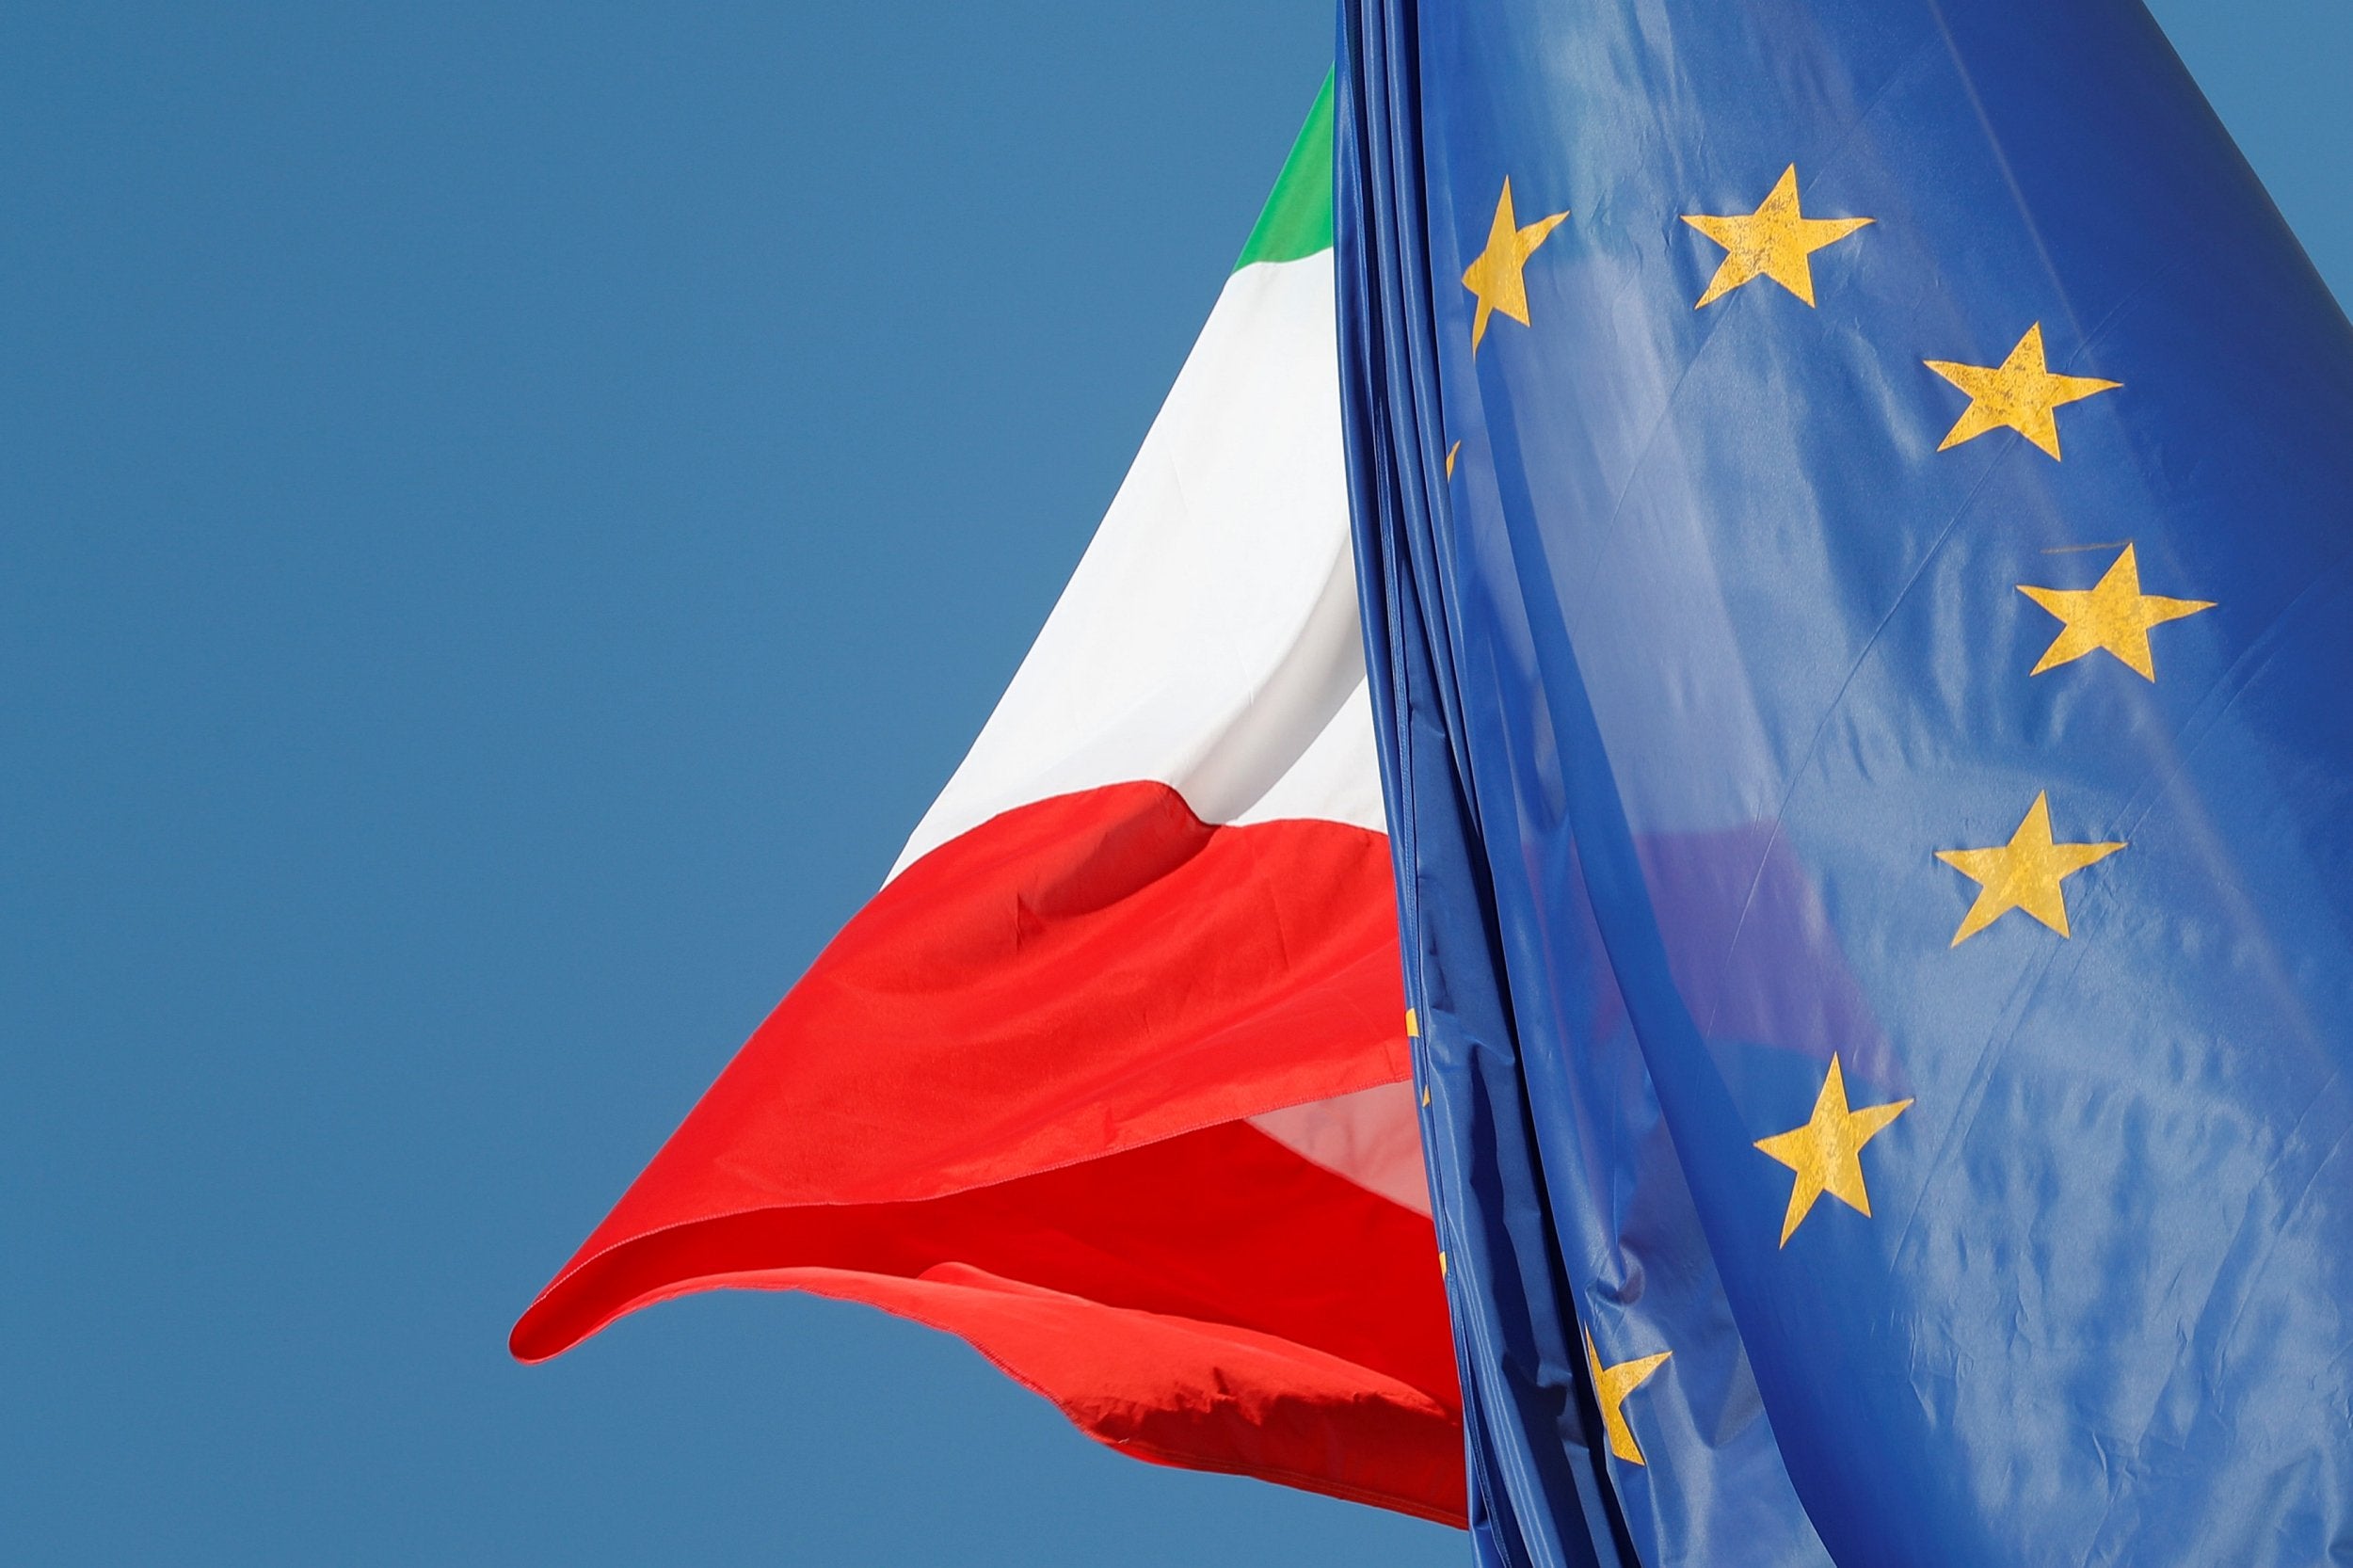 The European Commission is expected to reject Italy's draft budget on Tuesday